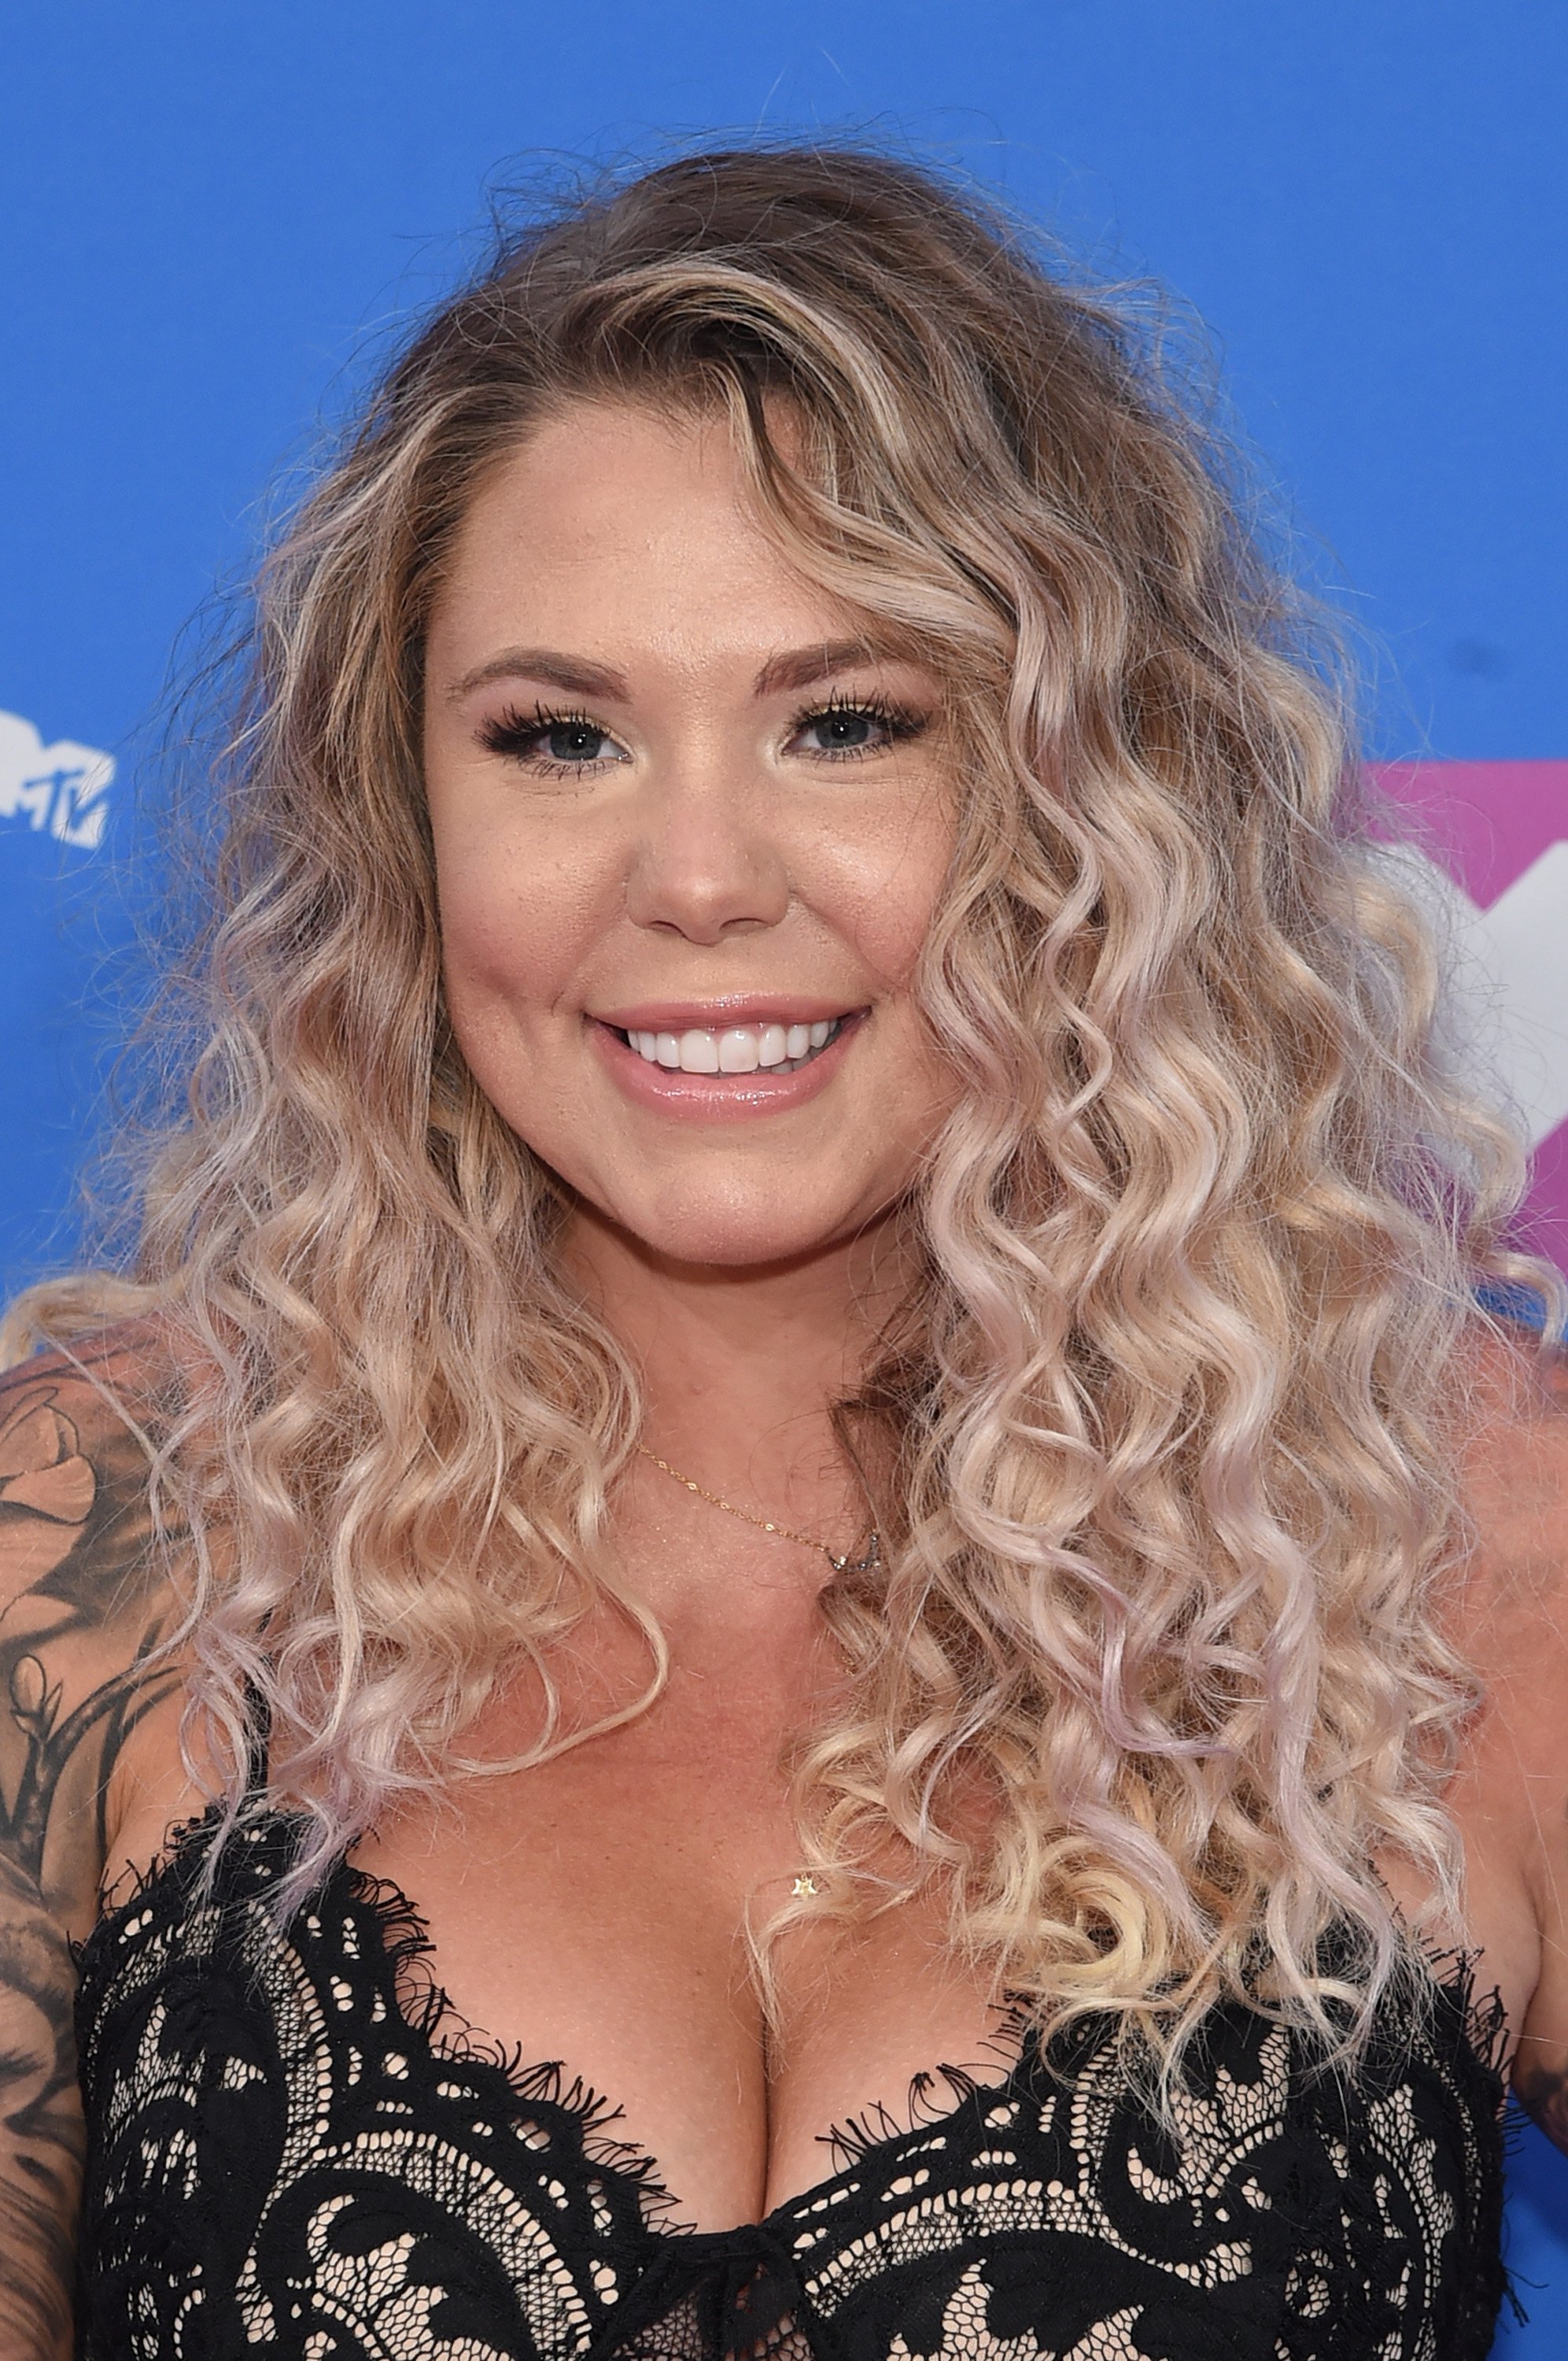 Kailyn Lowry at the MTV Video Music Awards